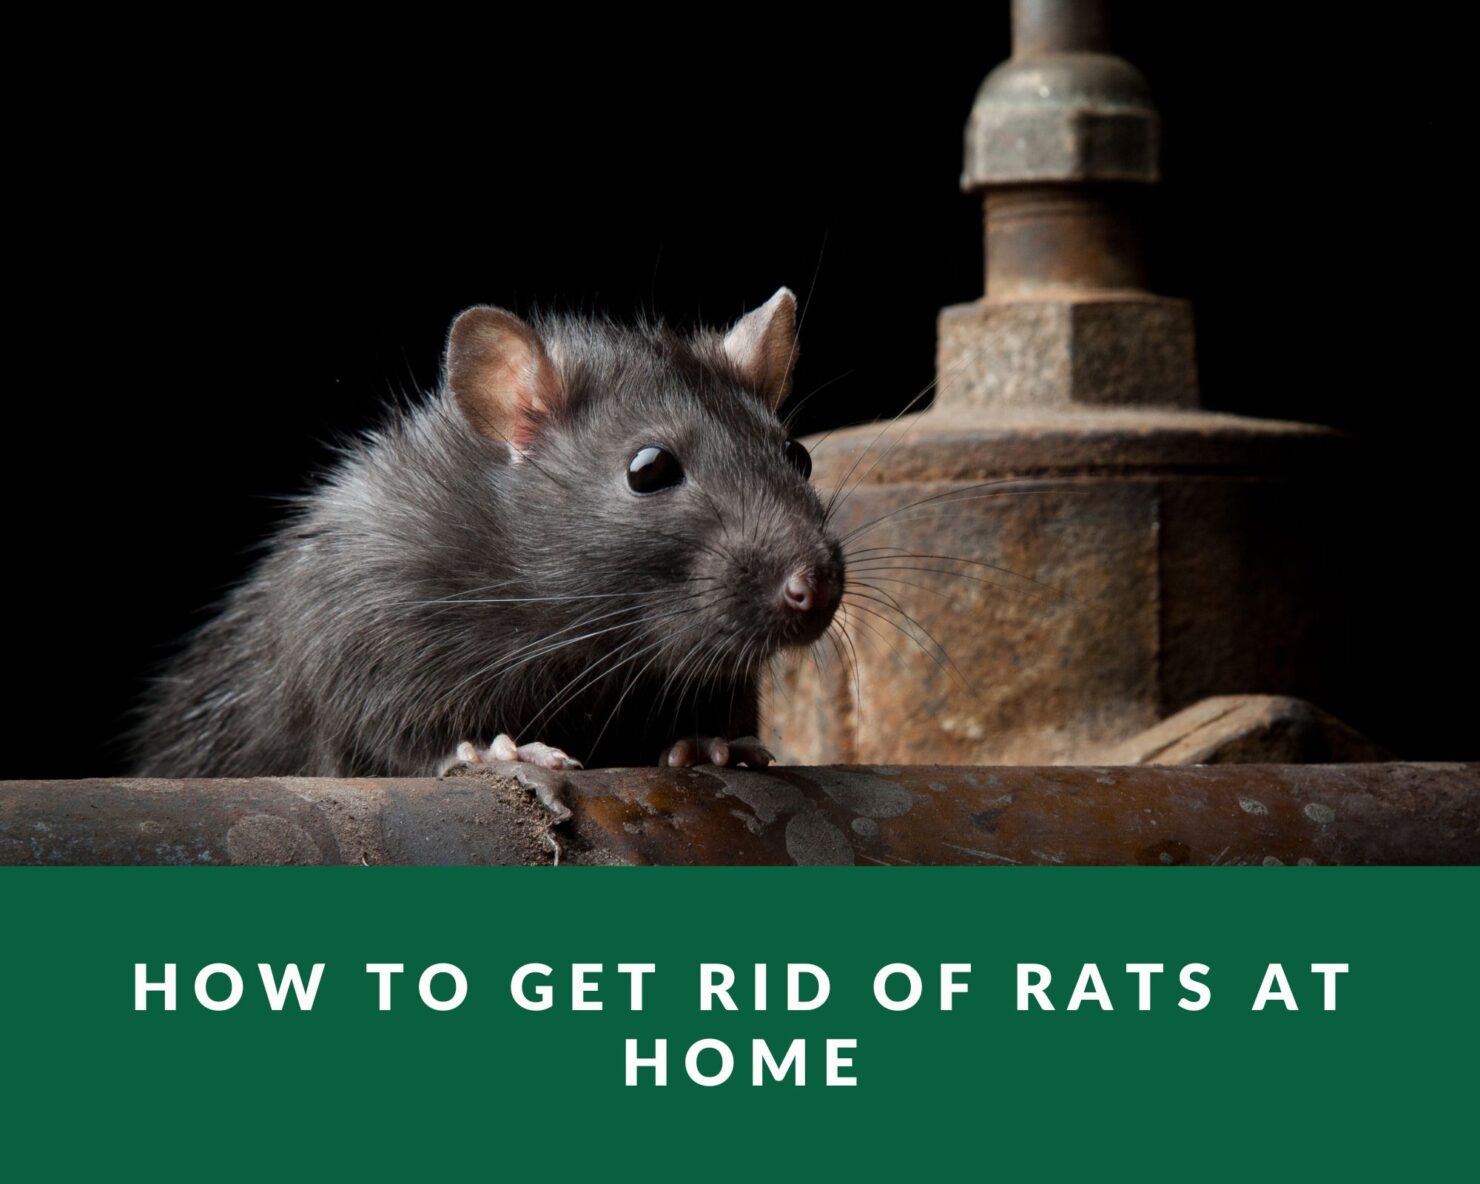 How to get rid of rats at home